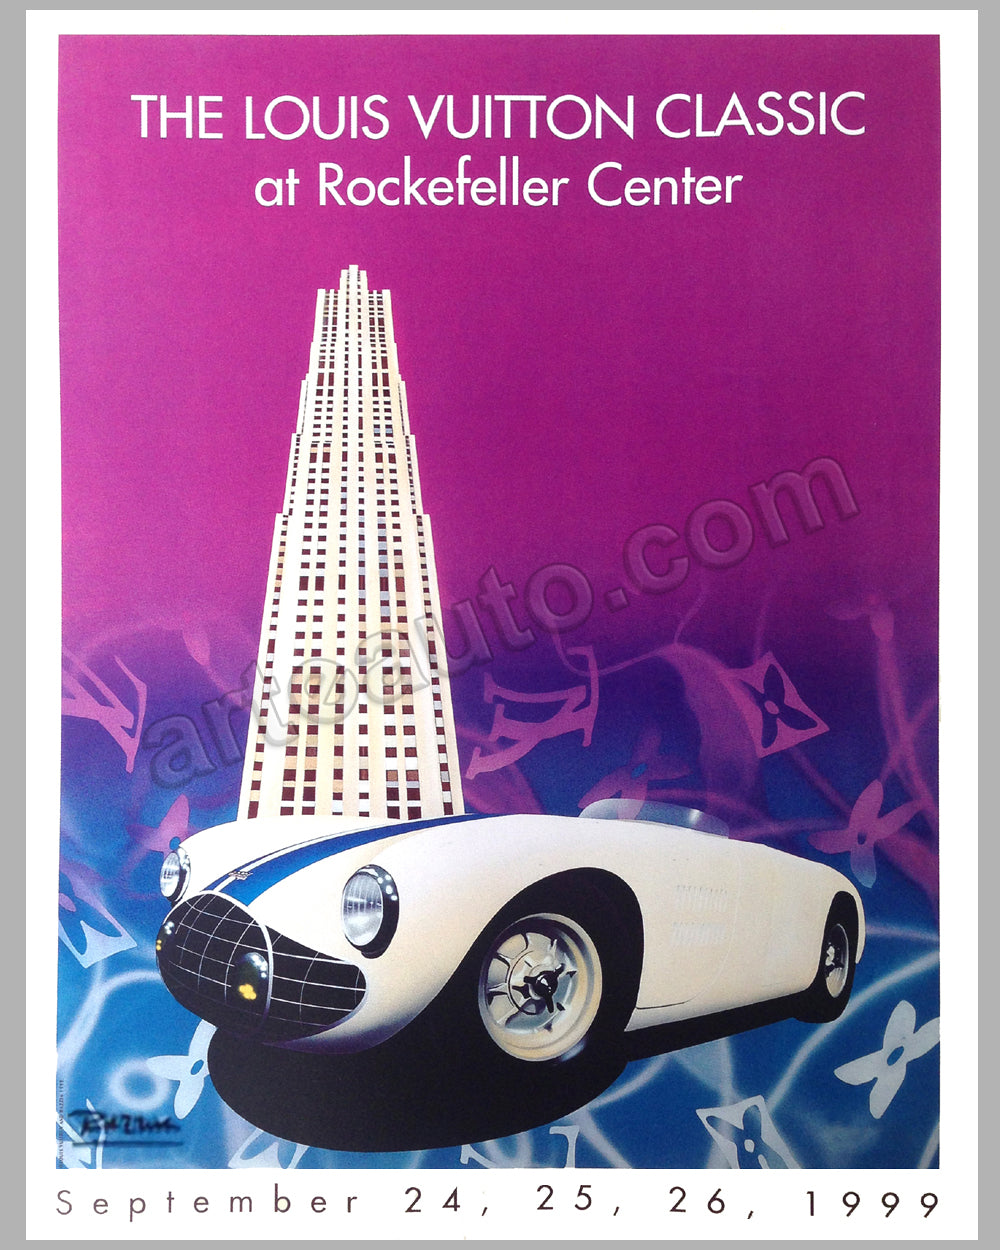 Louis Vuitton Classic at Rockefeller Center 1999 large poster by Razzia <p><em><span style="color: #ff2a00;"><strong>Temporarily Out of Stock</strong><br></span></em>$625.00</p>